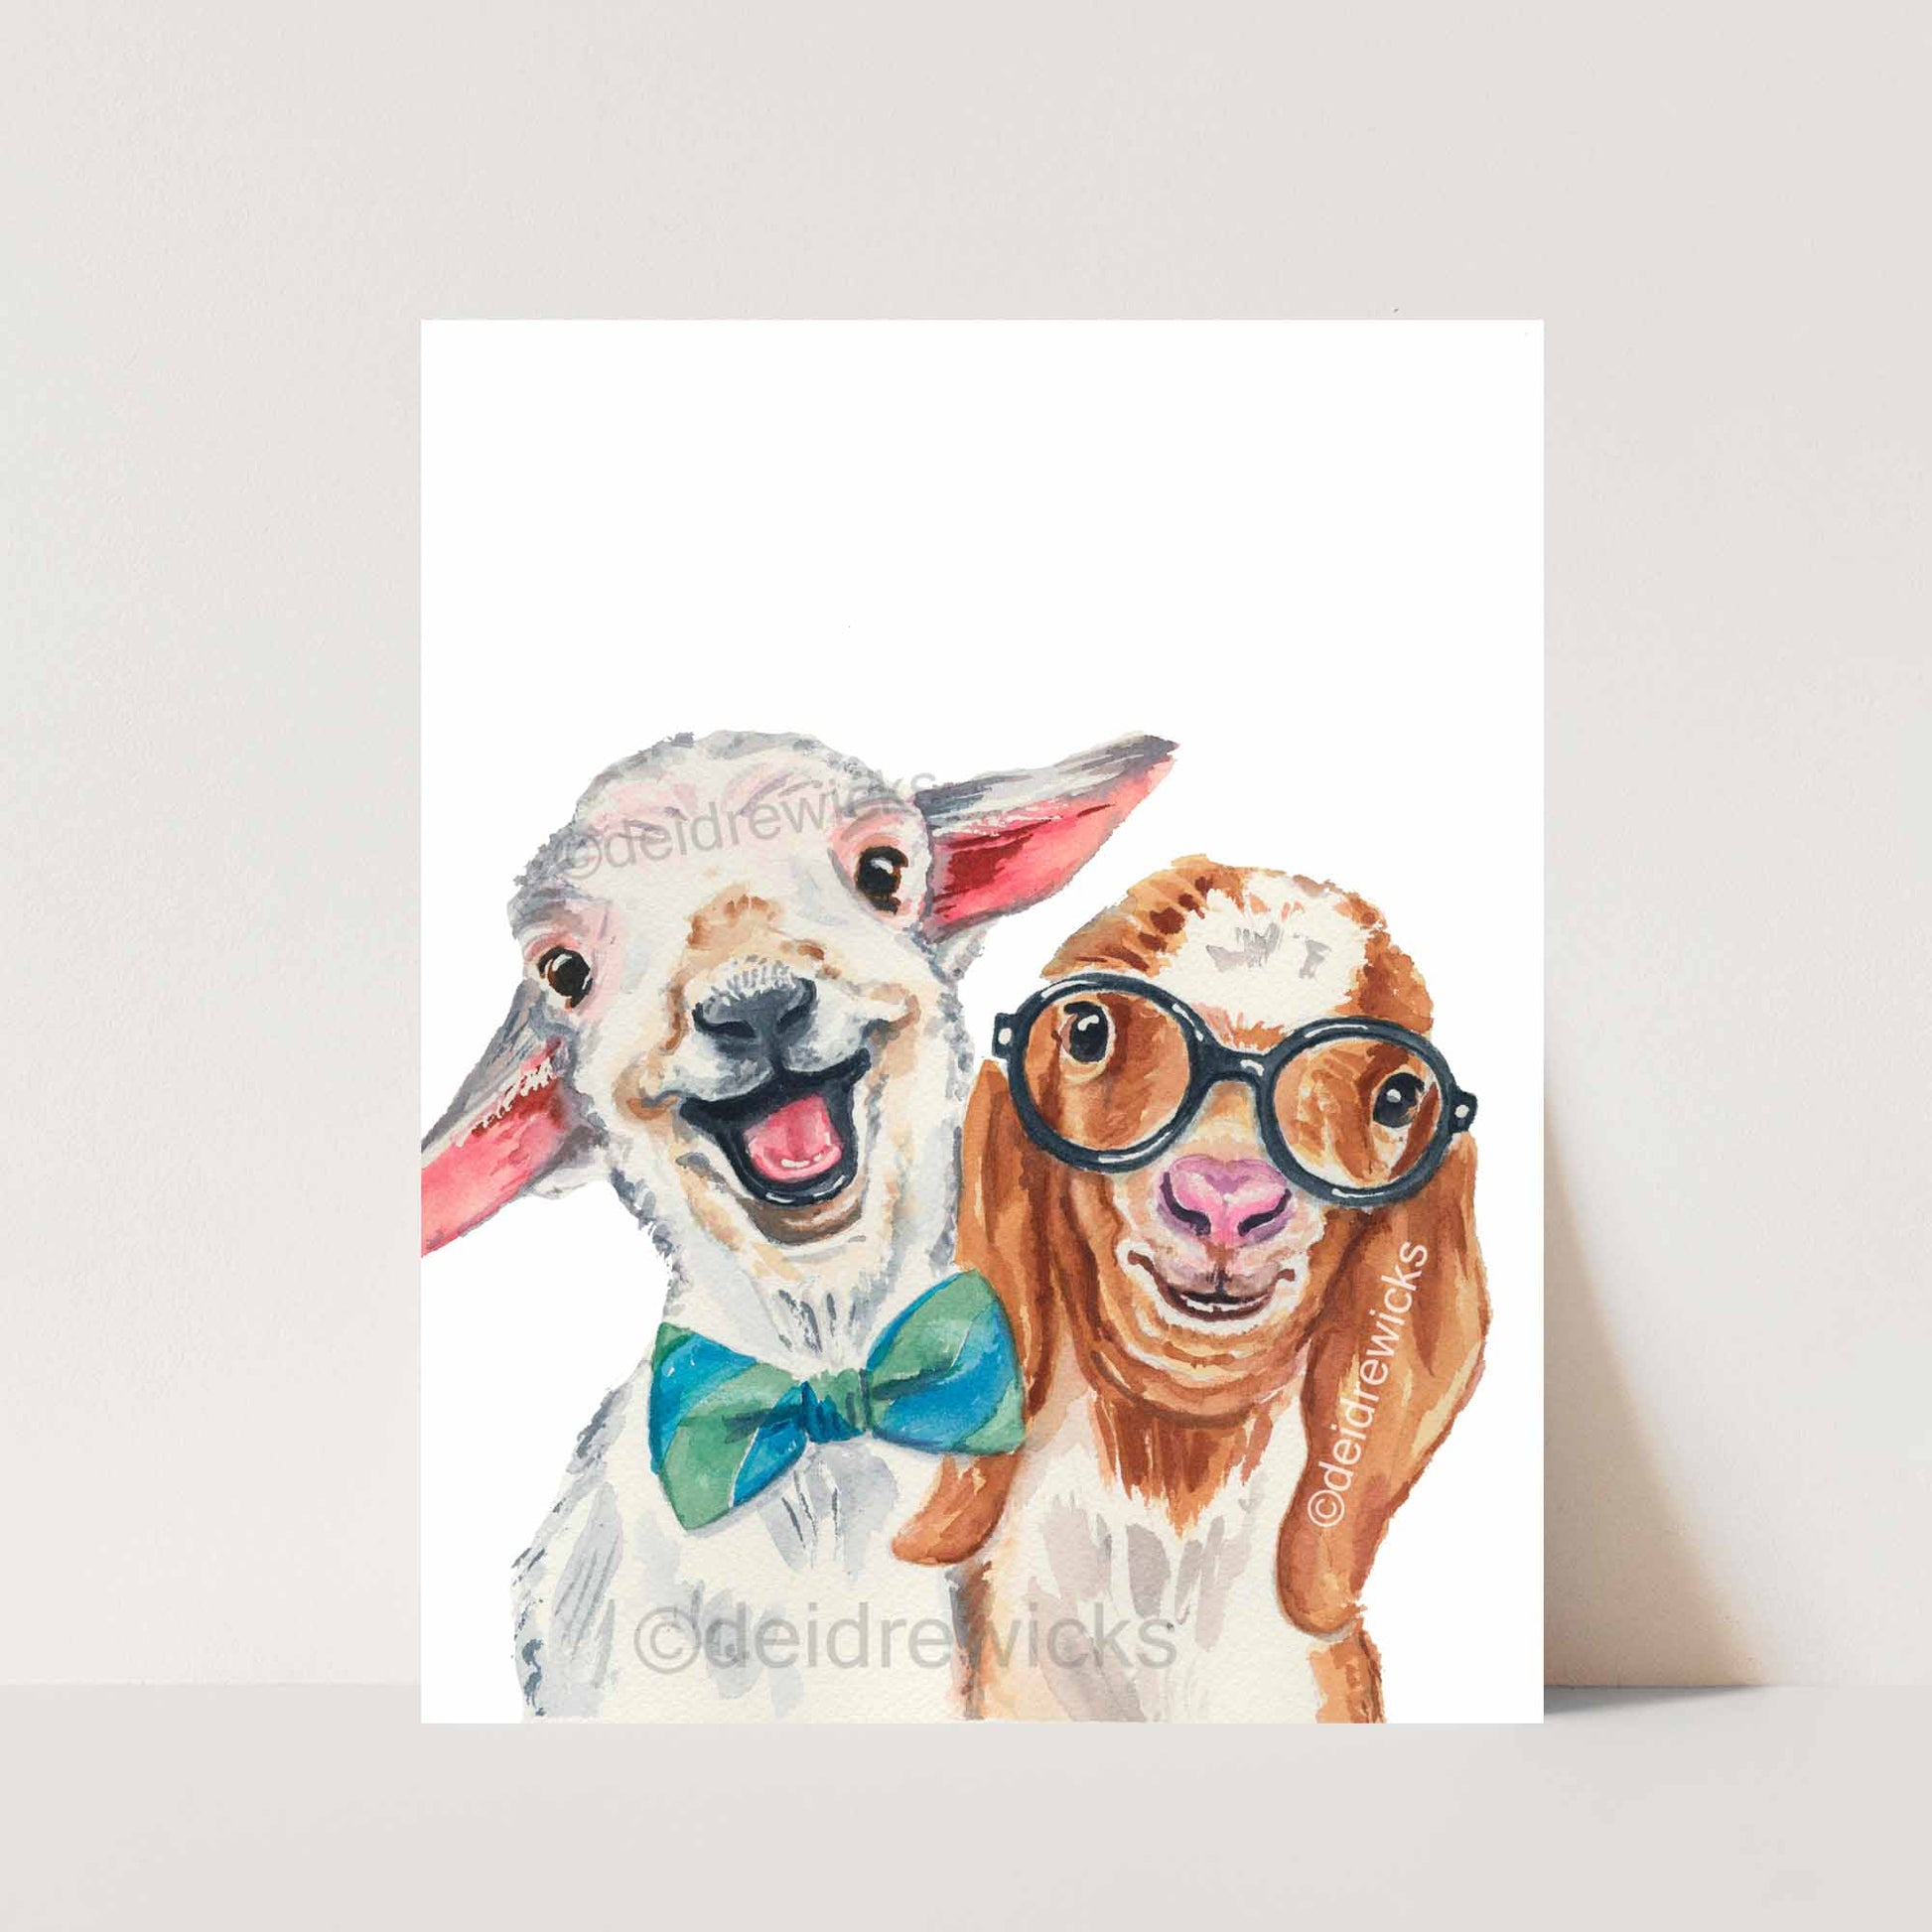 Watercolor print of a baby lamb and goat who are BFFs by artist Deidre Wicks